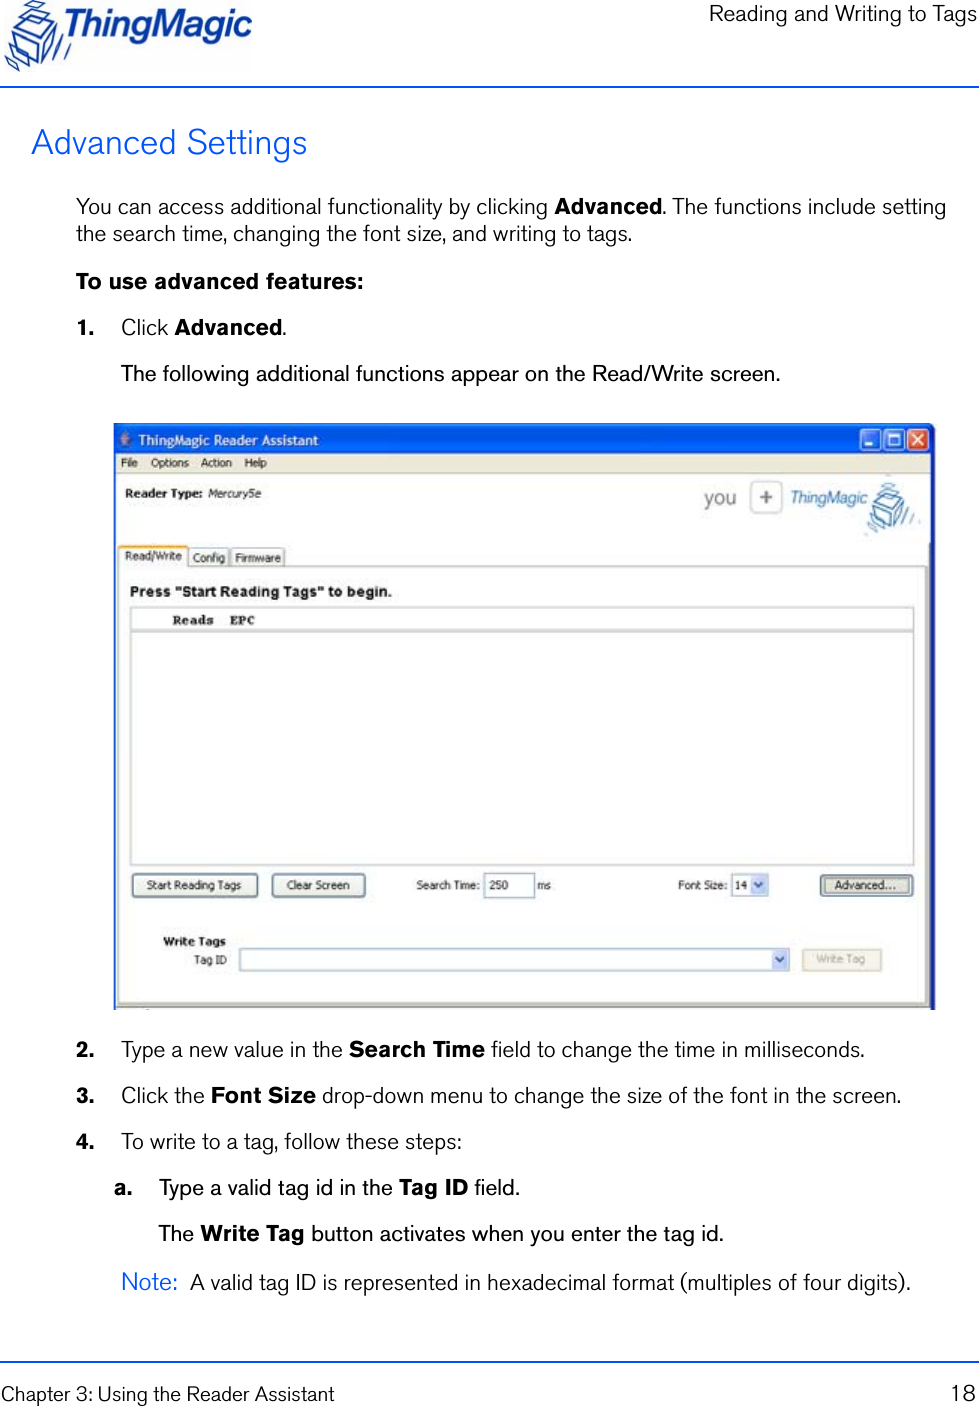 Reading and Writing to TagsChapter 3: Using the Reader Assistant 18Advanced SettingsYou can access additional functionality by clicking Advanced. The functions include setting the search time, changing the font size, and writing to tags.To use advanced features:1.    Click Advanced.The following additional functions appear on the Read/Write screen.2.    Type a new value in the Search Time field to change the time in milliseconds.3.    Click the Font Size drop-down menu to change the size of the font in the screen.4.    To write to a tag, follow these steps:a.    Type a valid tag id in the Tag ID field.The Write Tag button activates when you enter the tag id.Note:  A valid tag ID is represented in hexadecimal format (multiples of four digits).